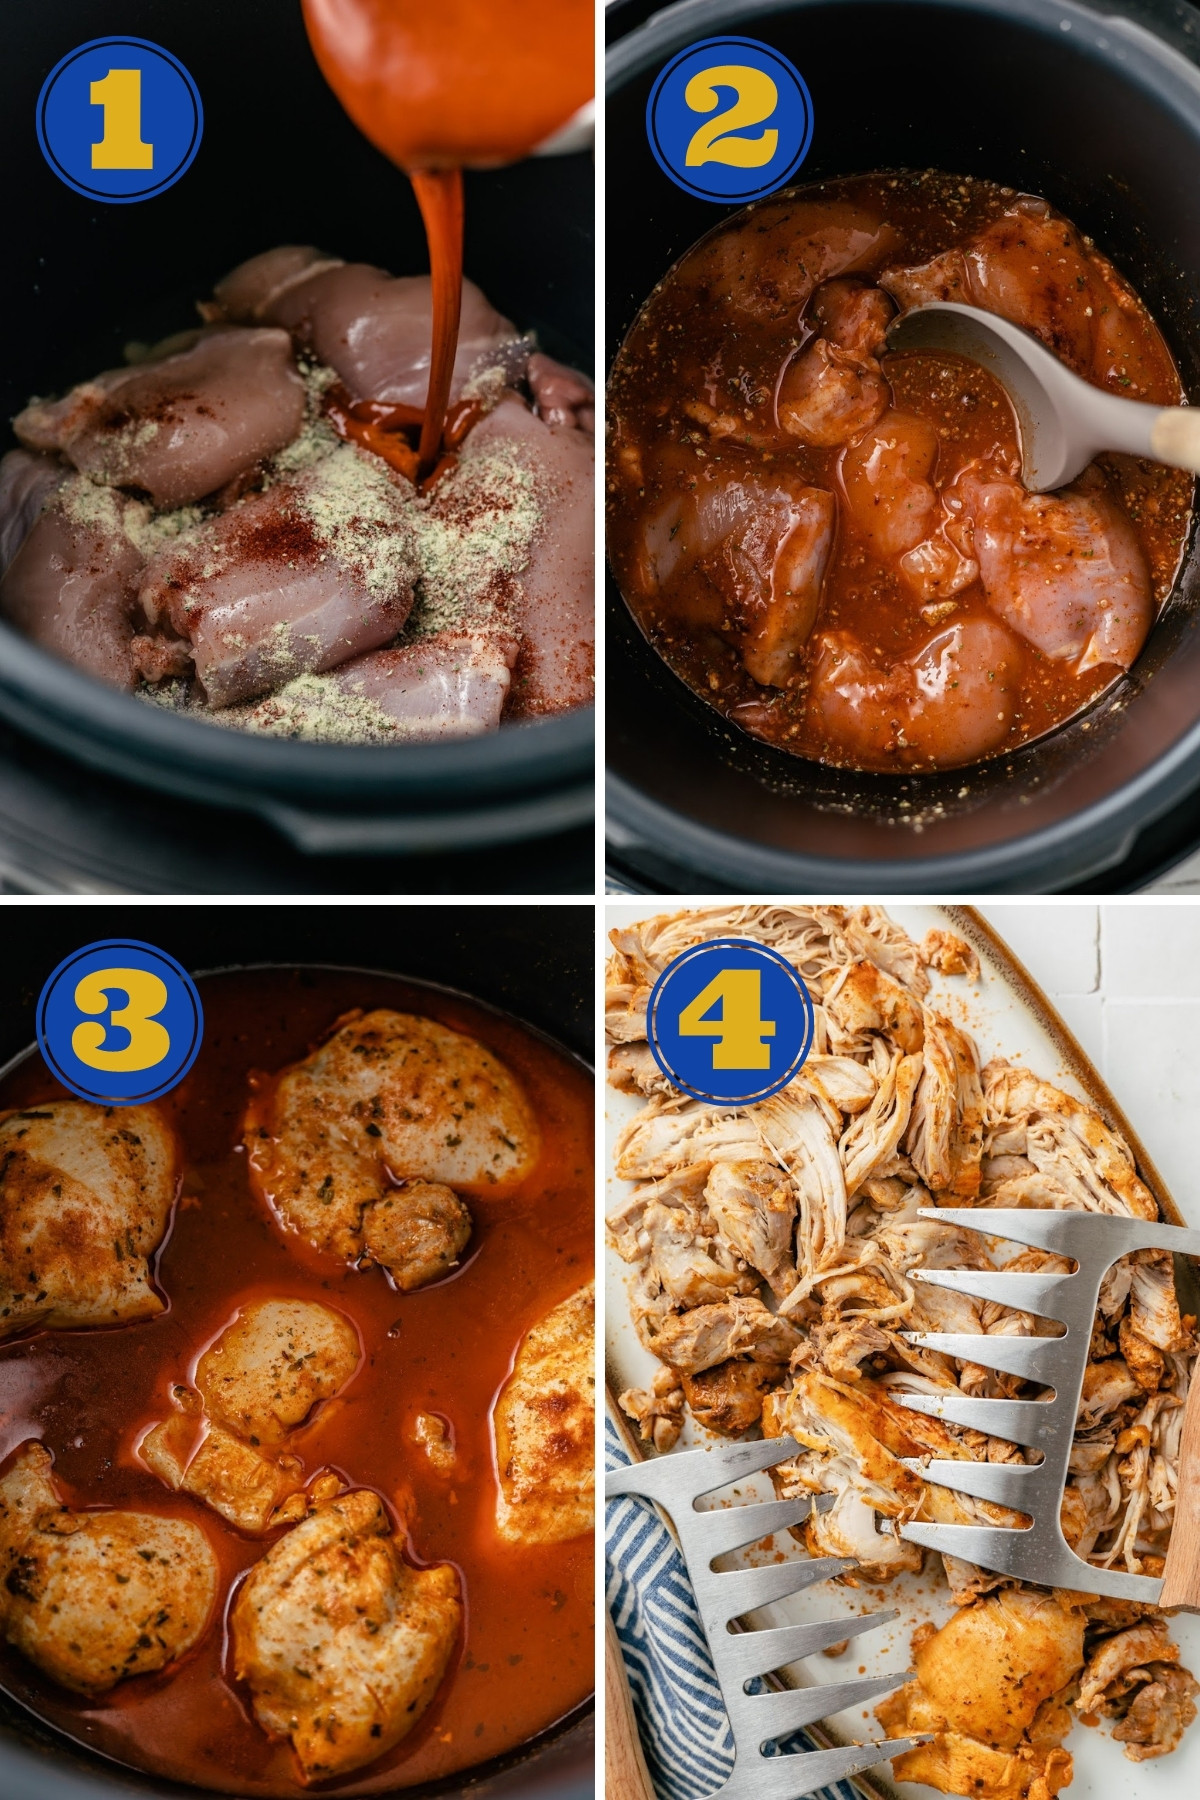 step-by-step instructions to make Shredded Buffalo Chicken in an instant pot pressure cooker with simple seasonings and a meat shredded.